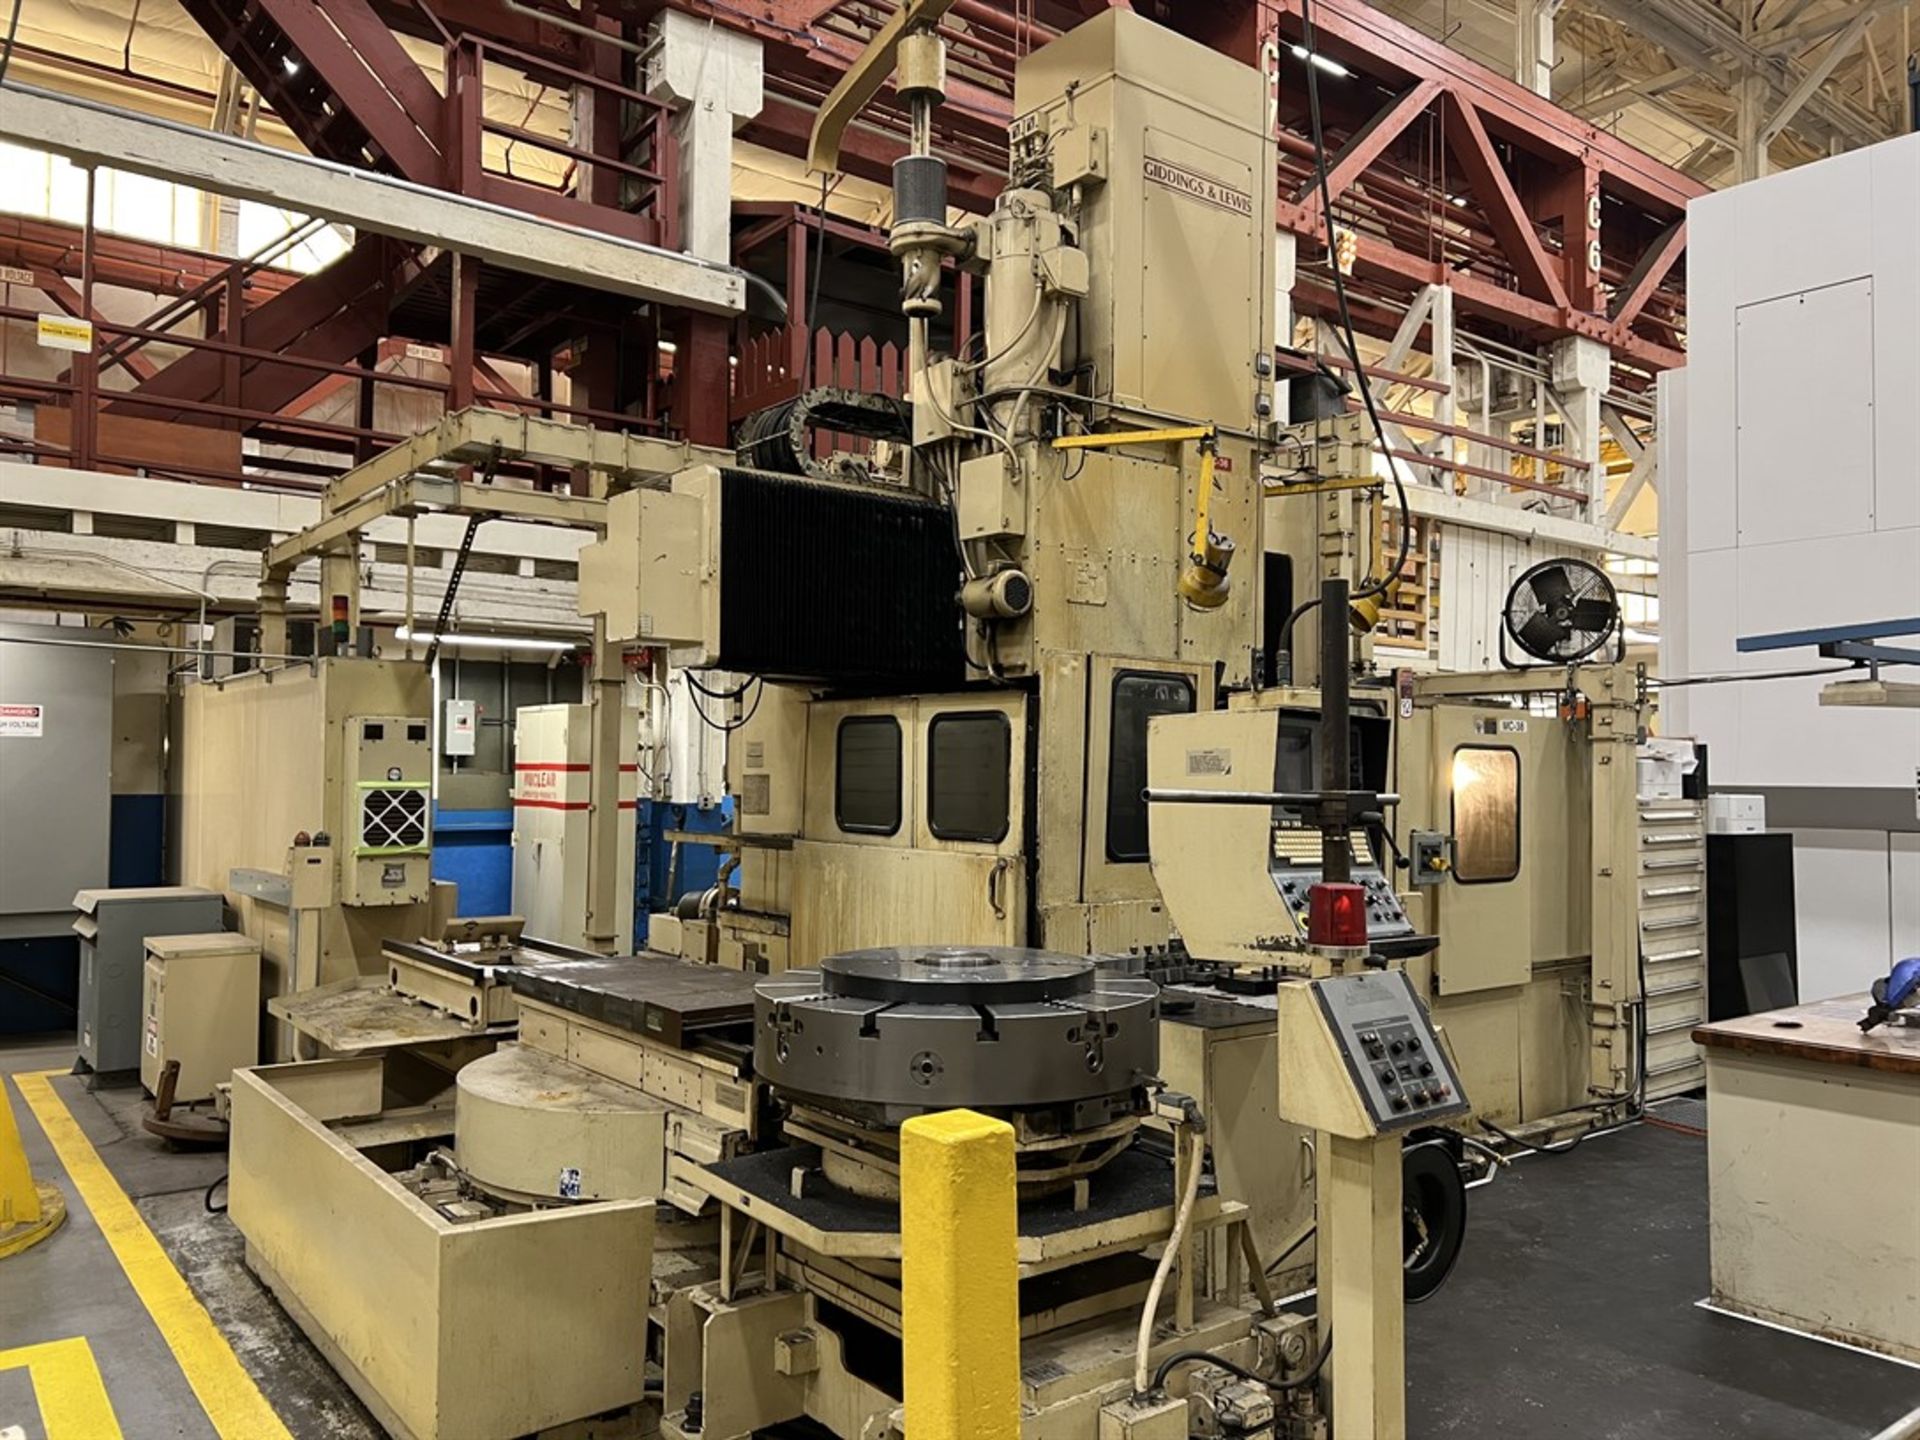 GIDDINGS & LEWIS 36 VTC Twin Pallet Vertical Turning Center with Milling, s/n 511-137-90, G & L